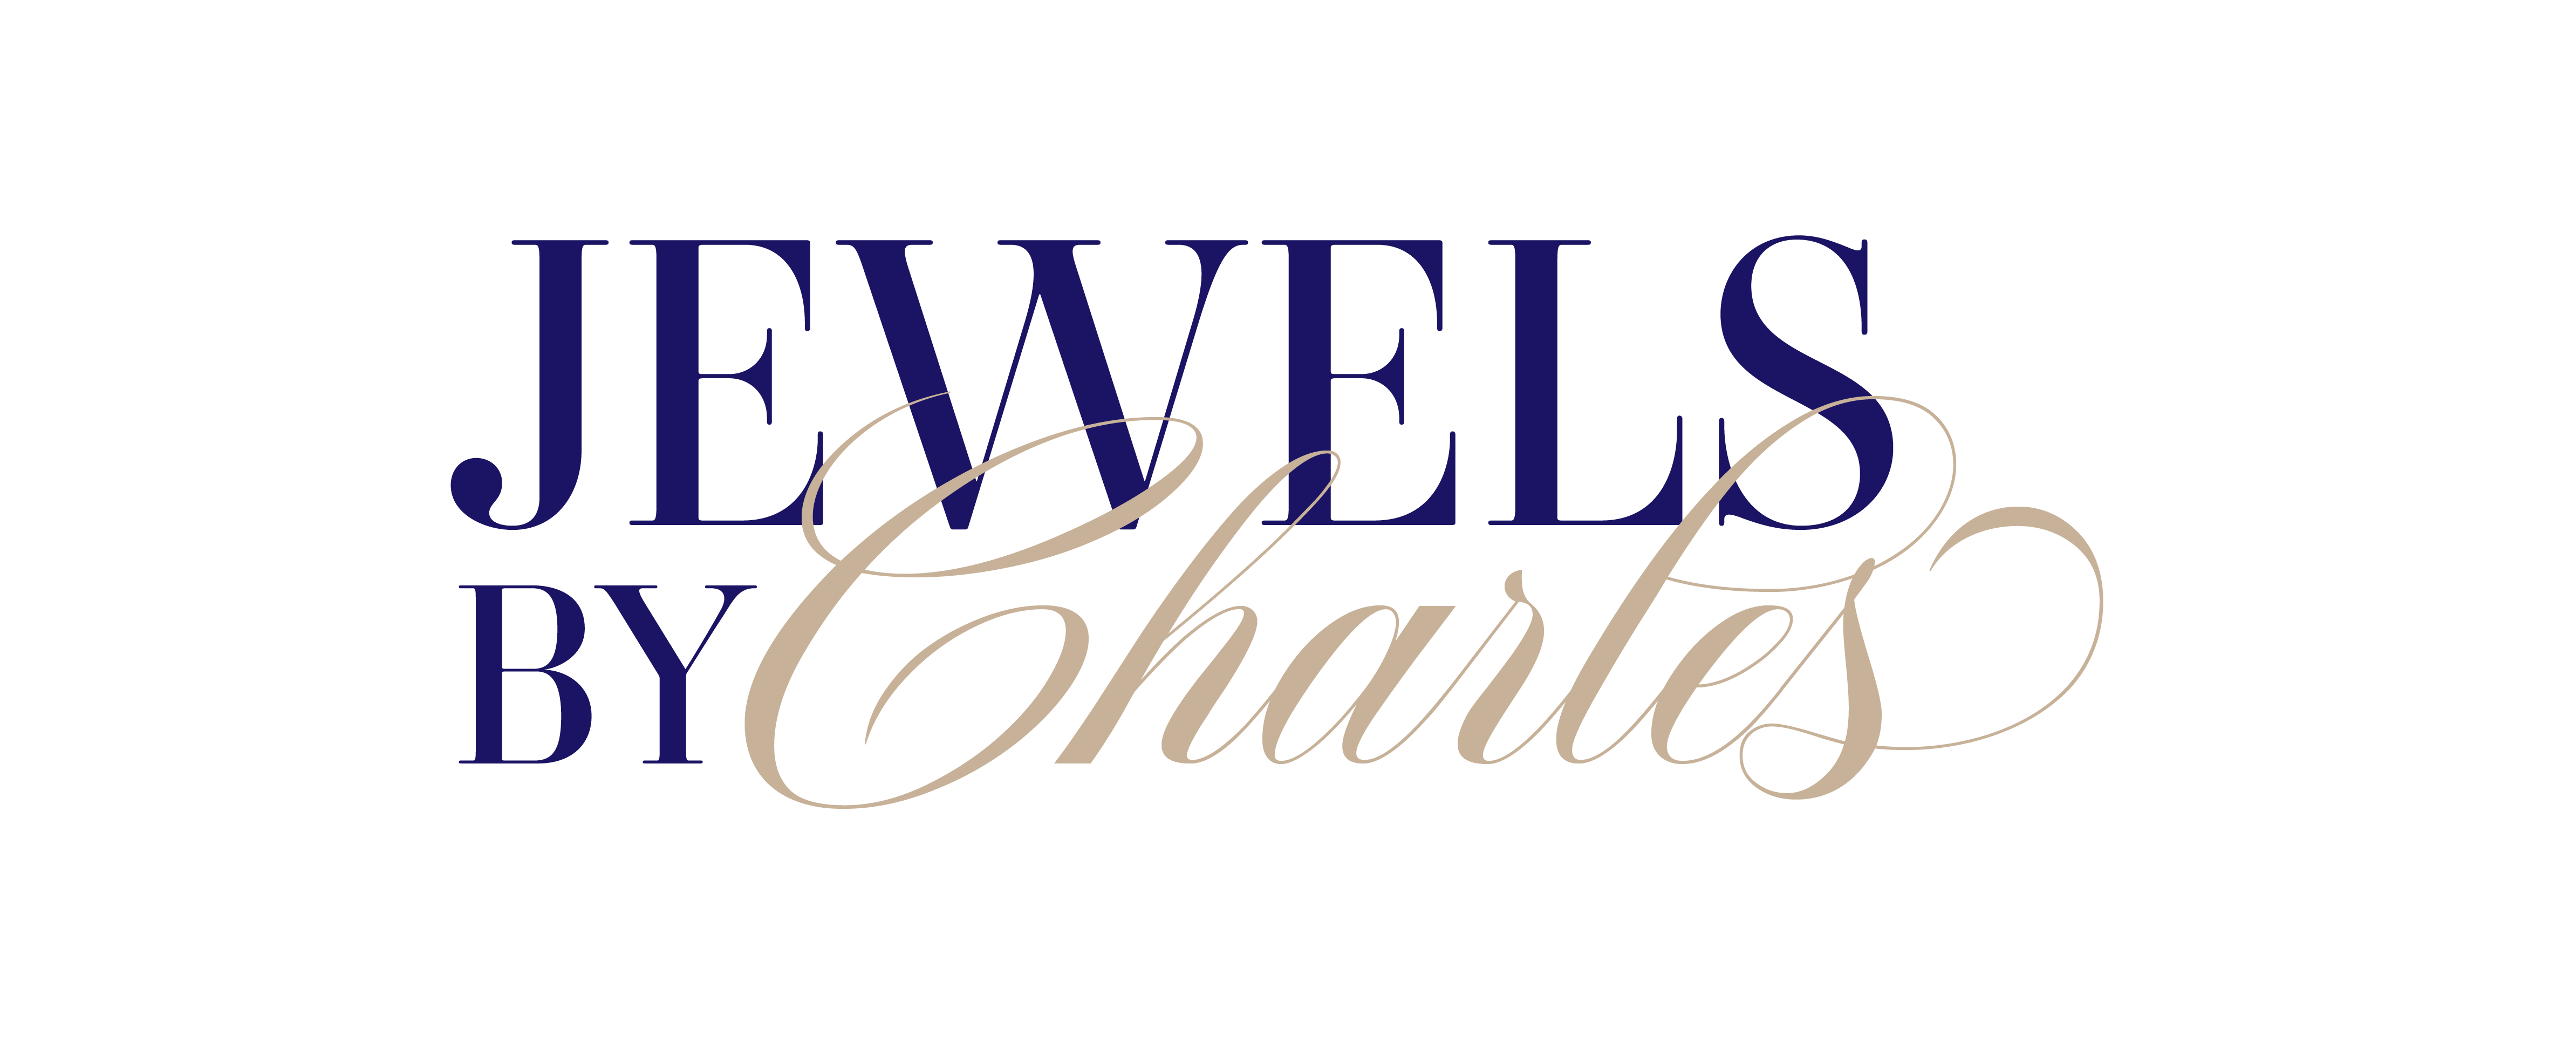 JEWELS BY CHARLES